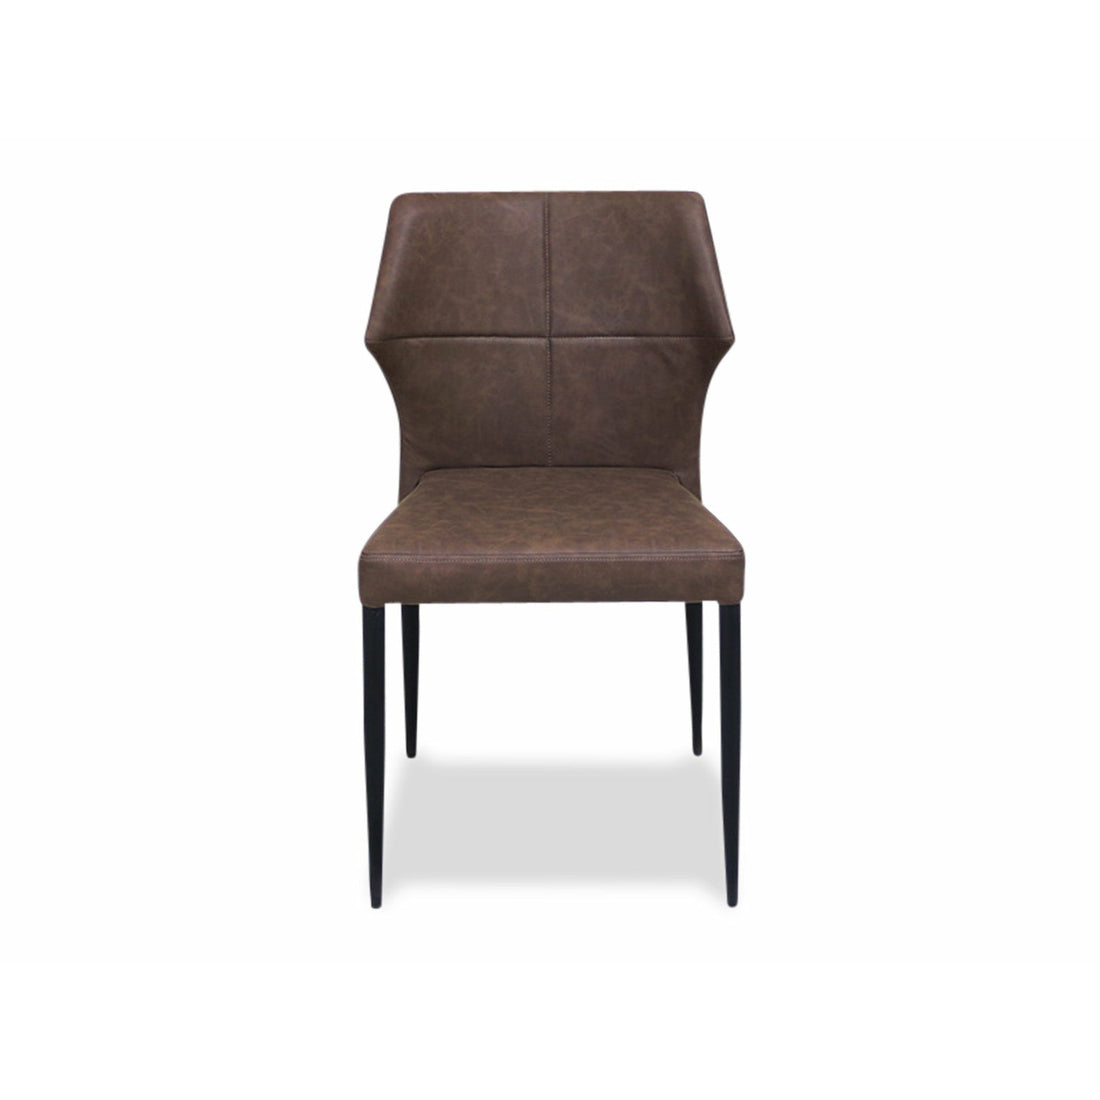 House of Sander - Runa dining chair, Brown